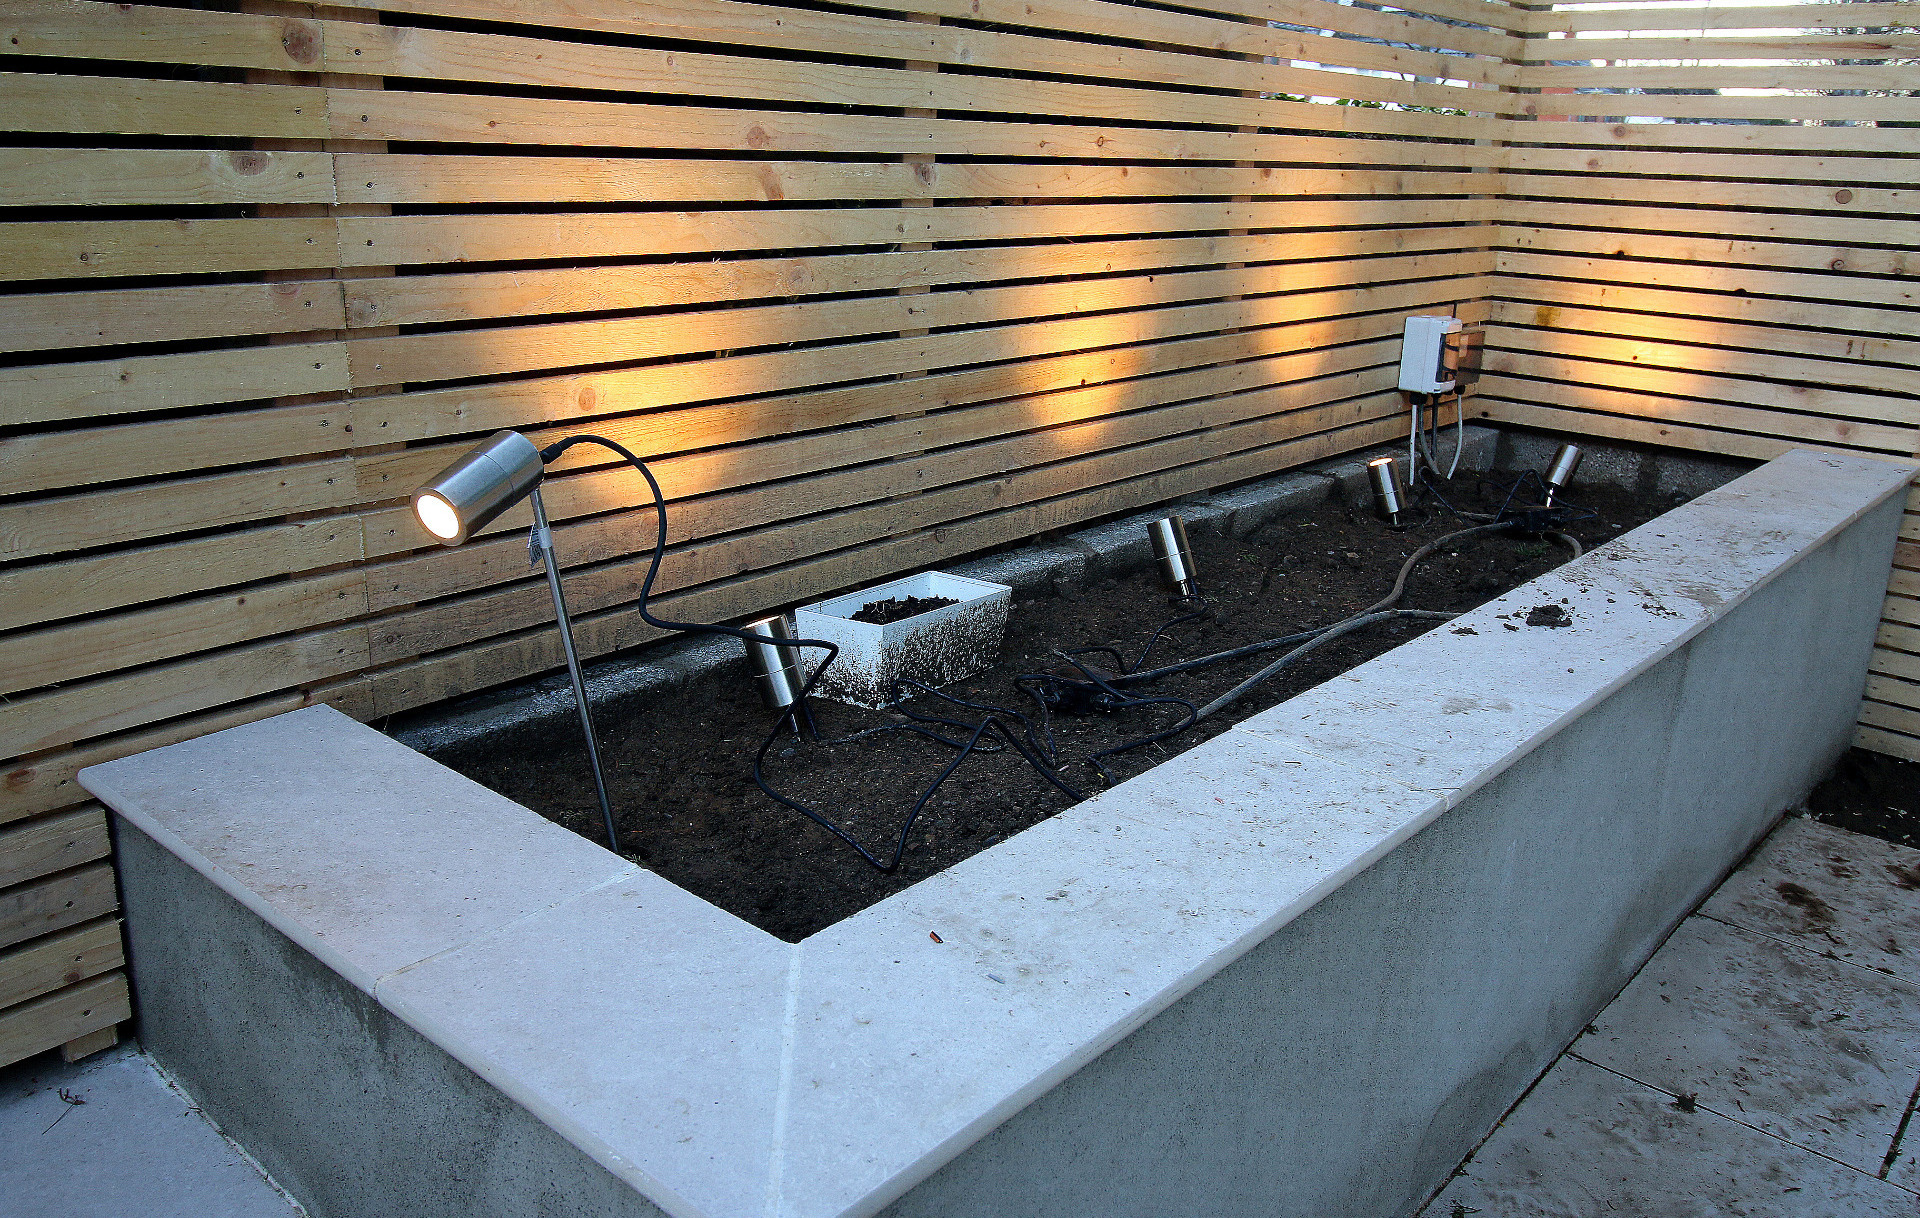 Stunning stainless steel LED garden lighting available in 2 sizes | the best light for your garden, driveway and pathways